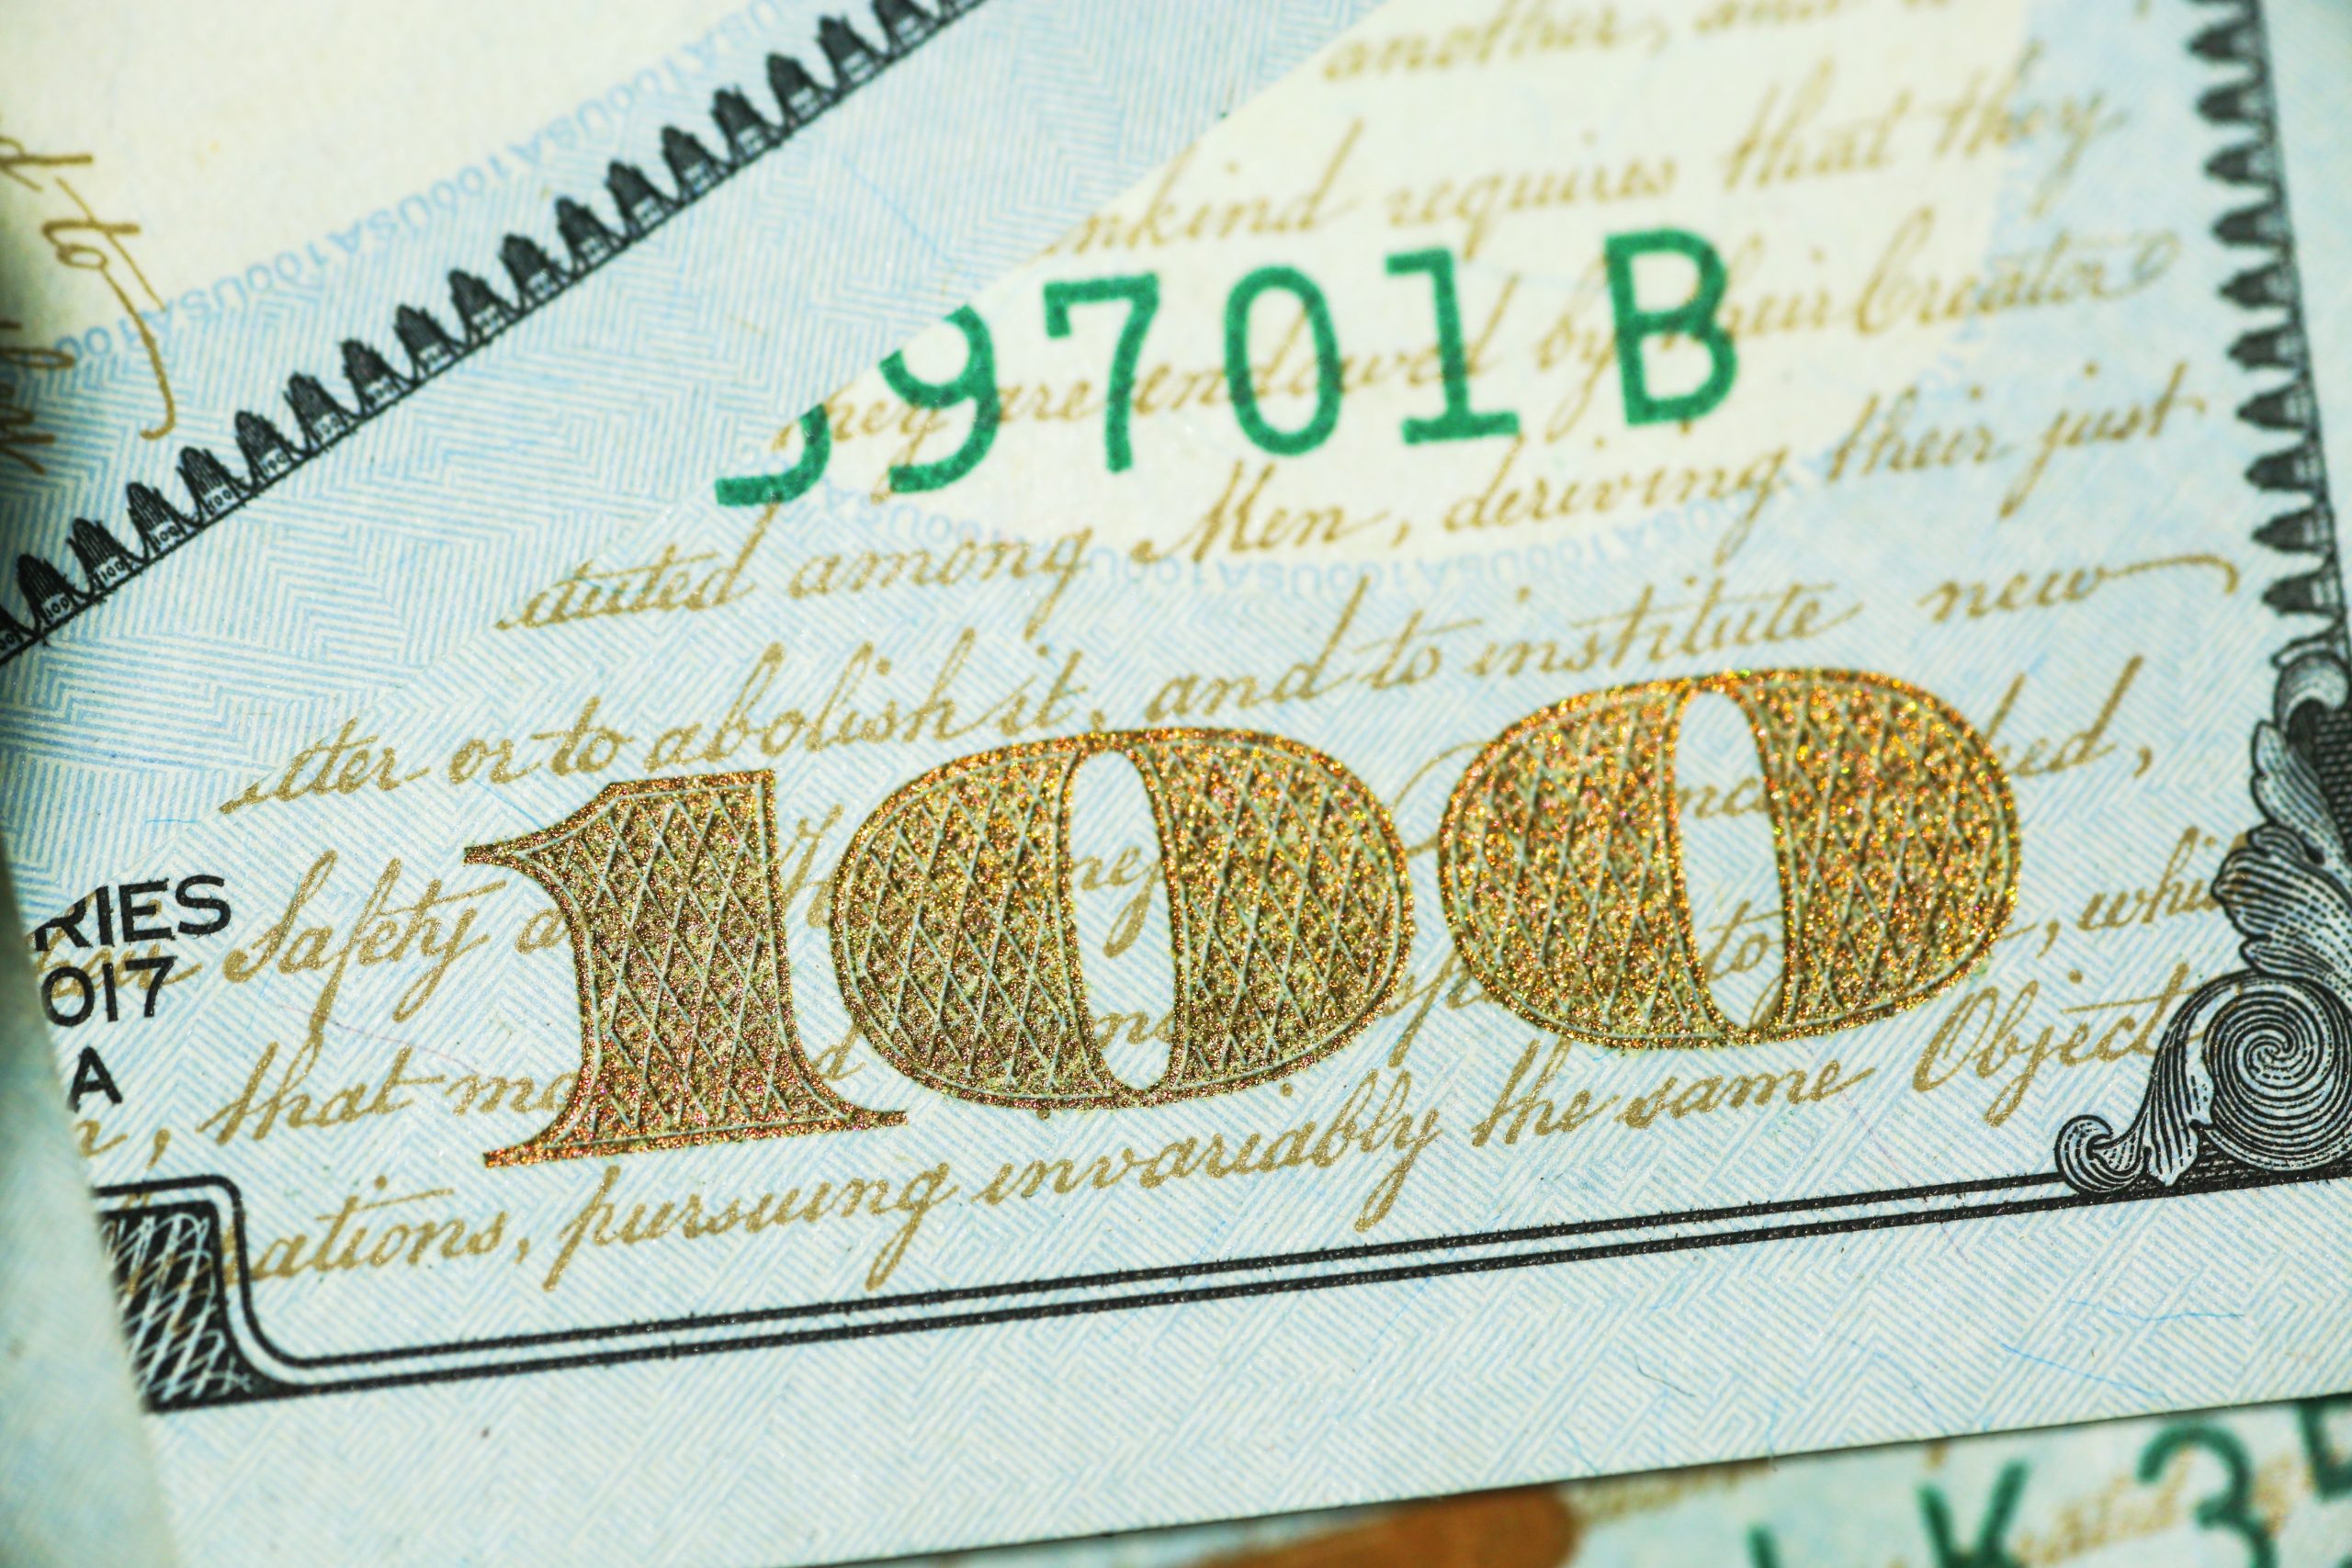 Image of a one hundred dollar bill